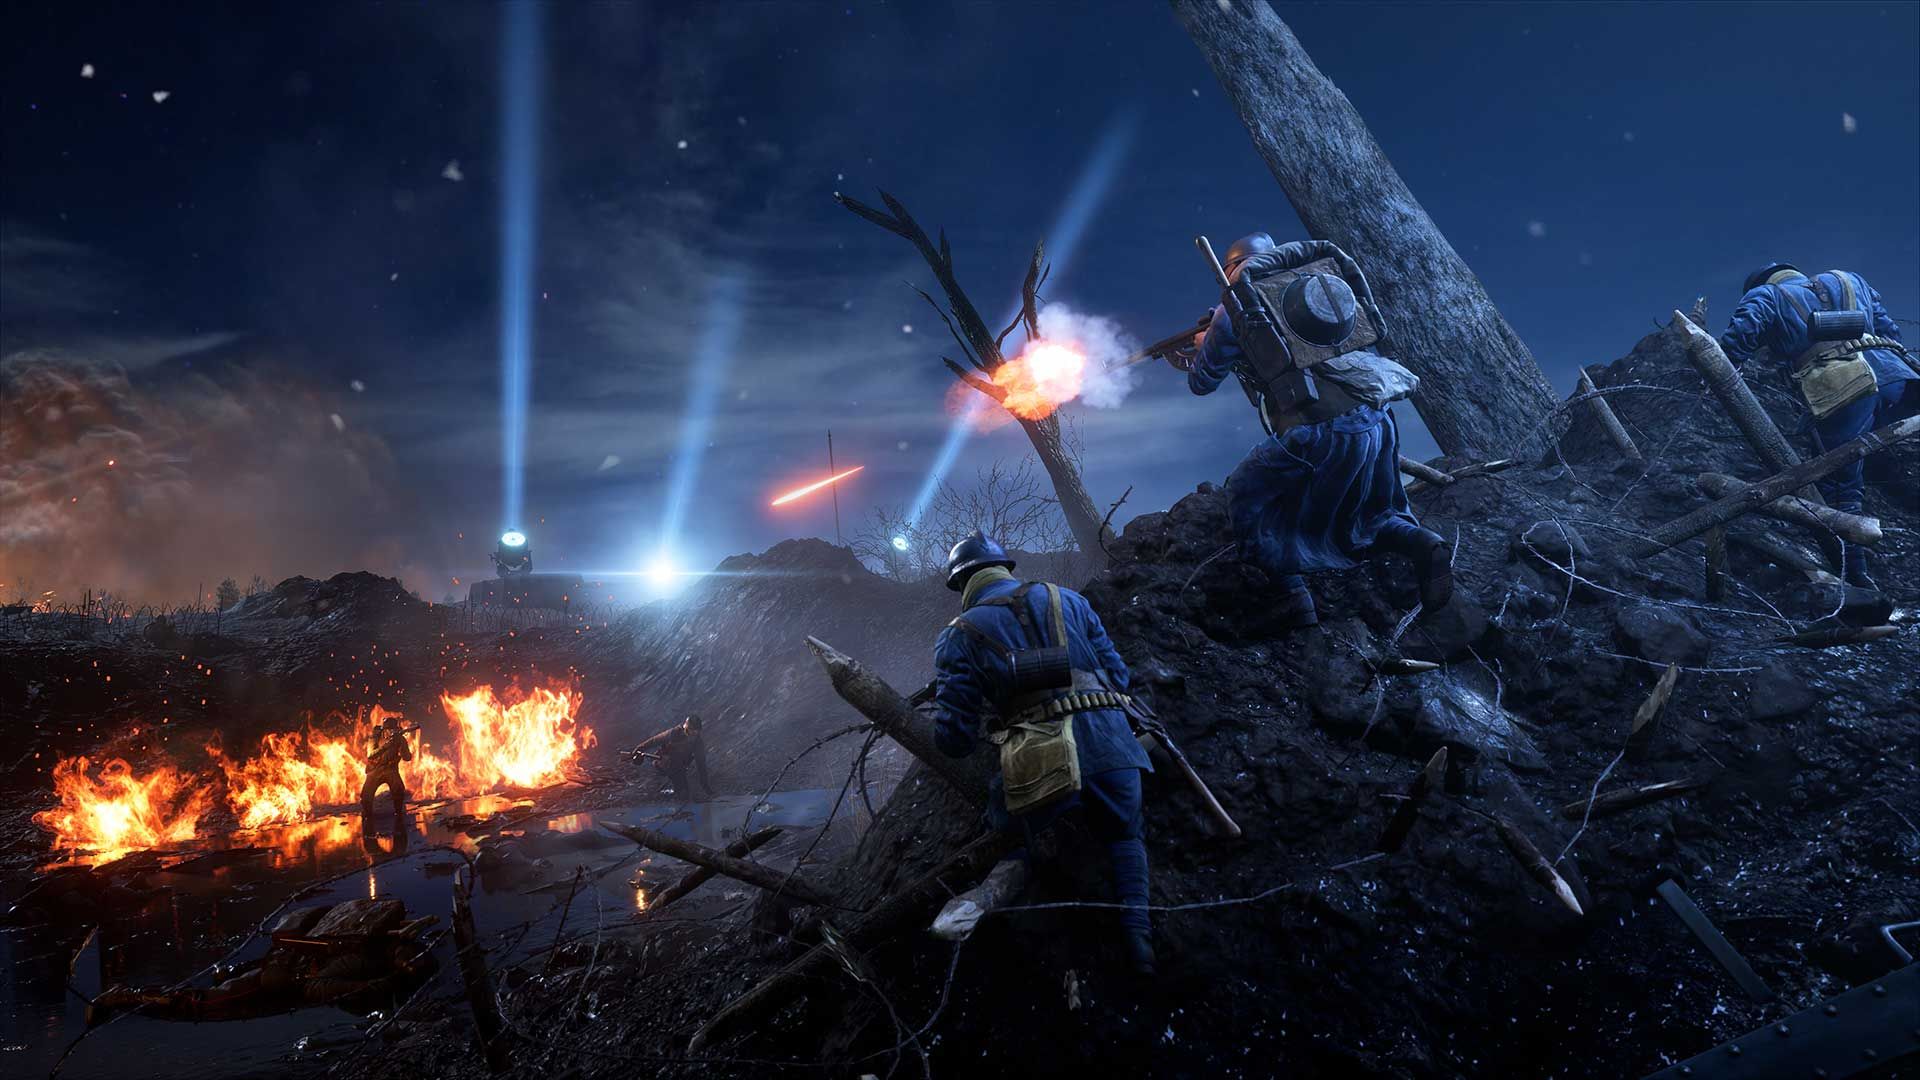 They shall not pay: Battlefield 1's first expansion is available for free |